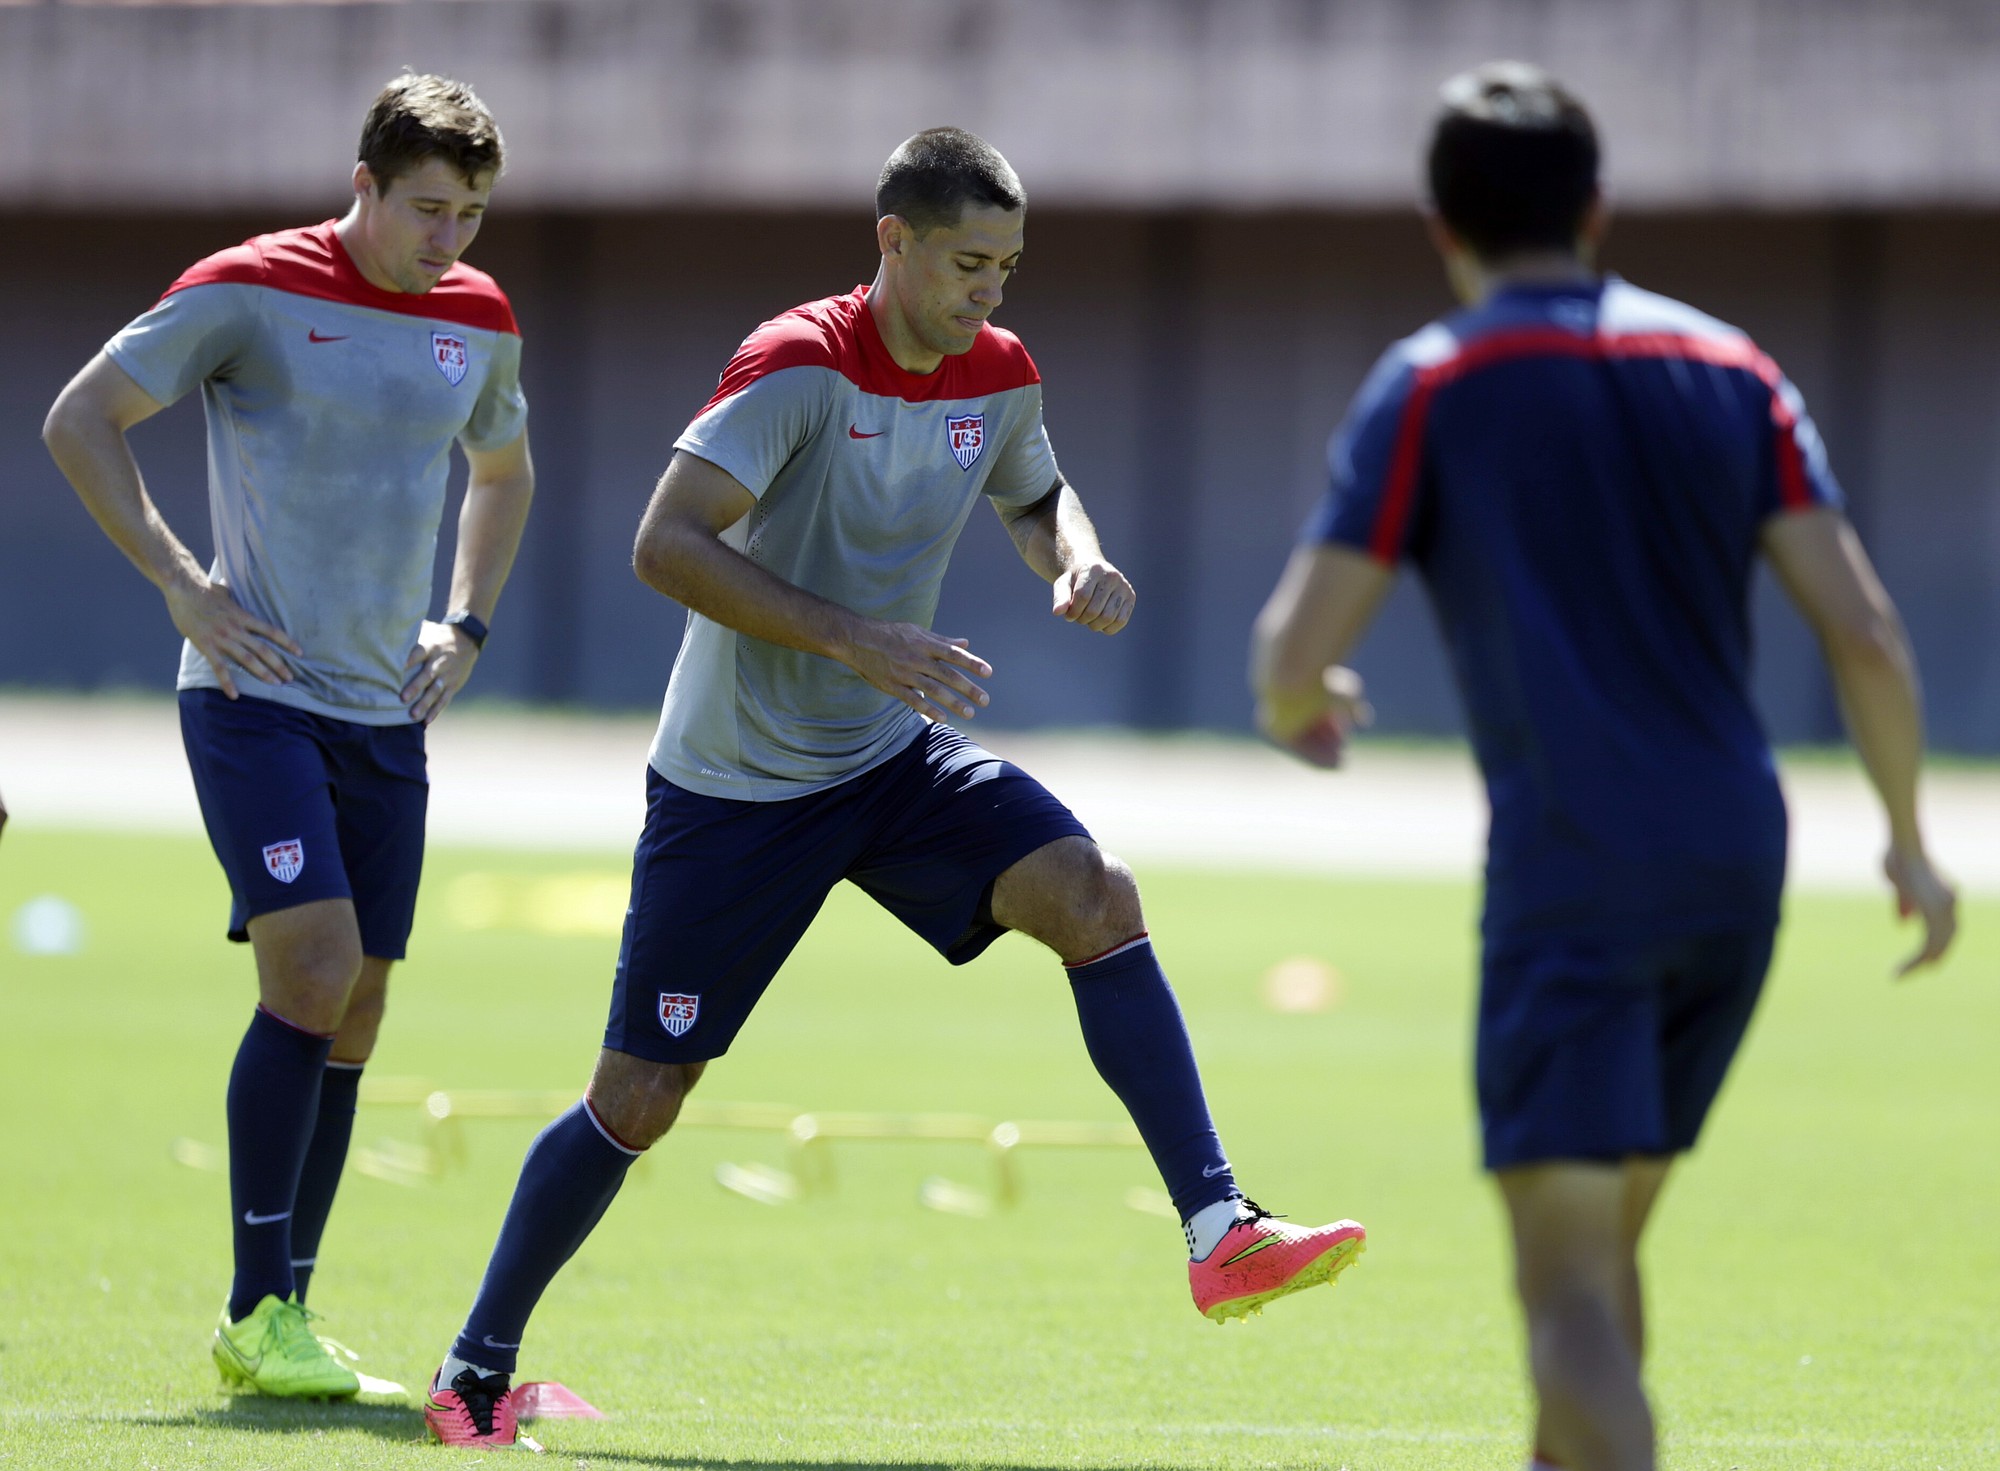 United Statesu2019 Clint Dempsey, center, and Matt Besler, left, work out during a training session in Salvador, Brazil, Monday.